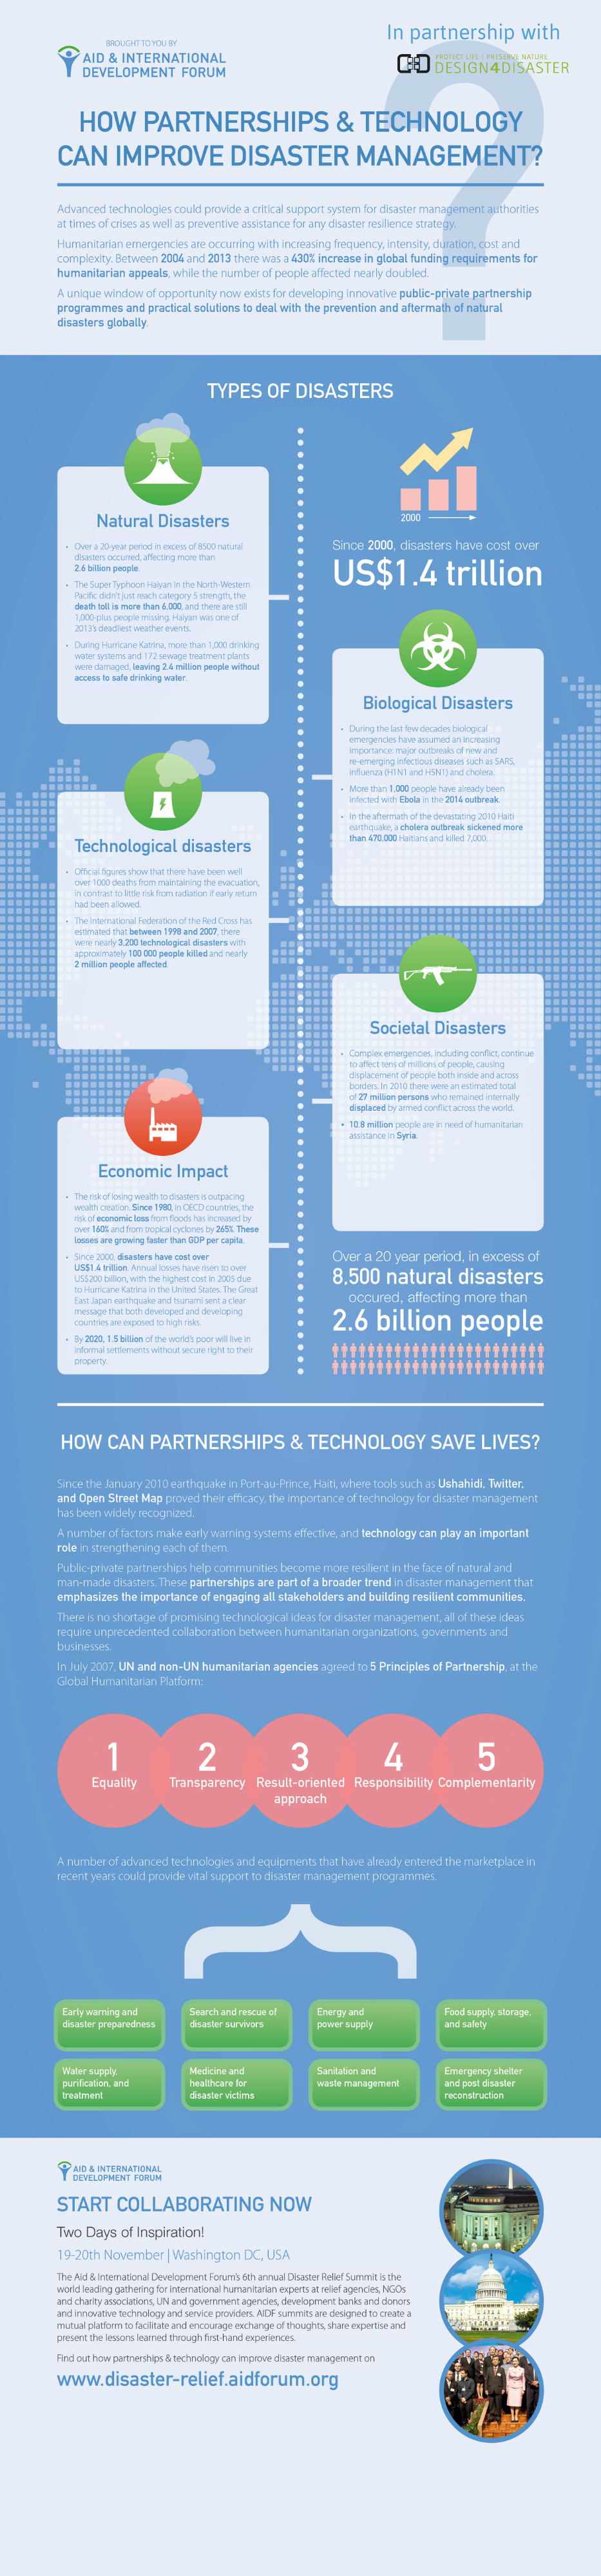 AIDF DISASTER RELIEF INFOGRAPHIC (D4D-edition)